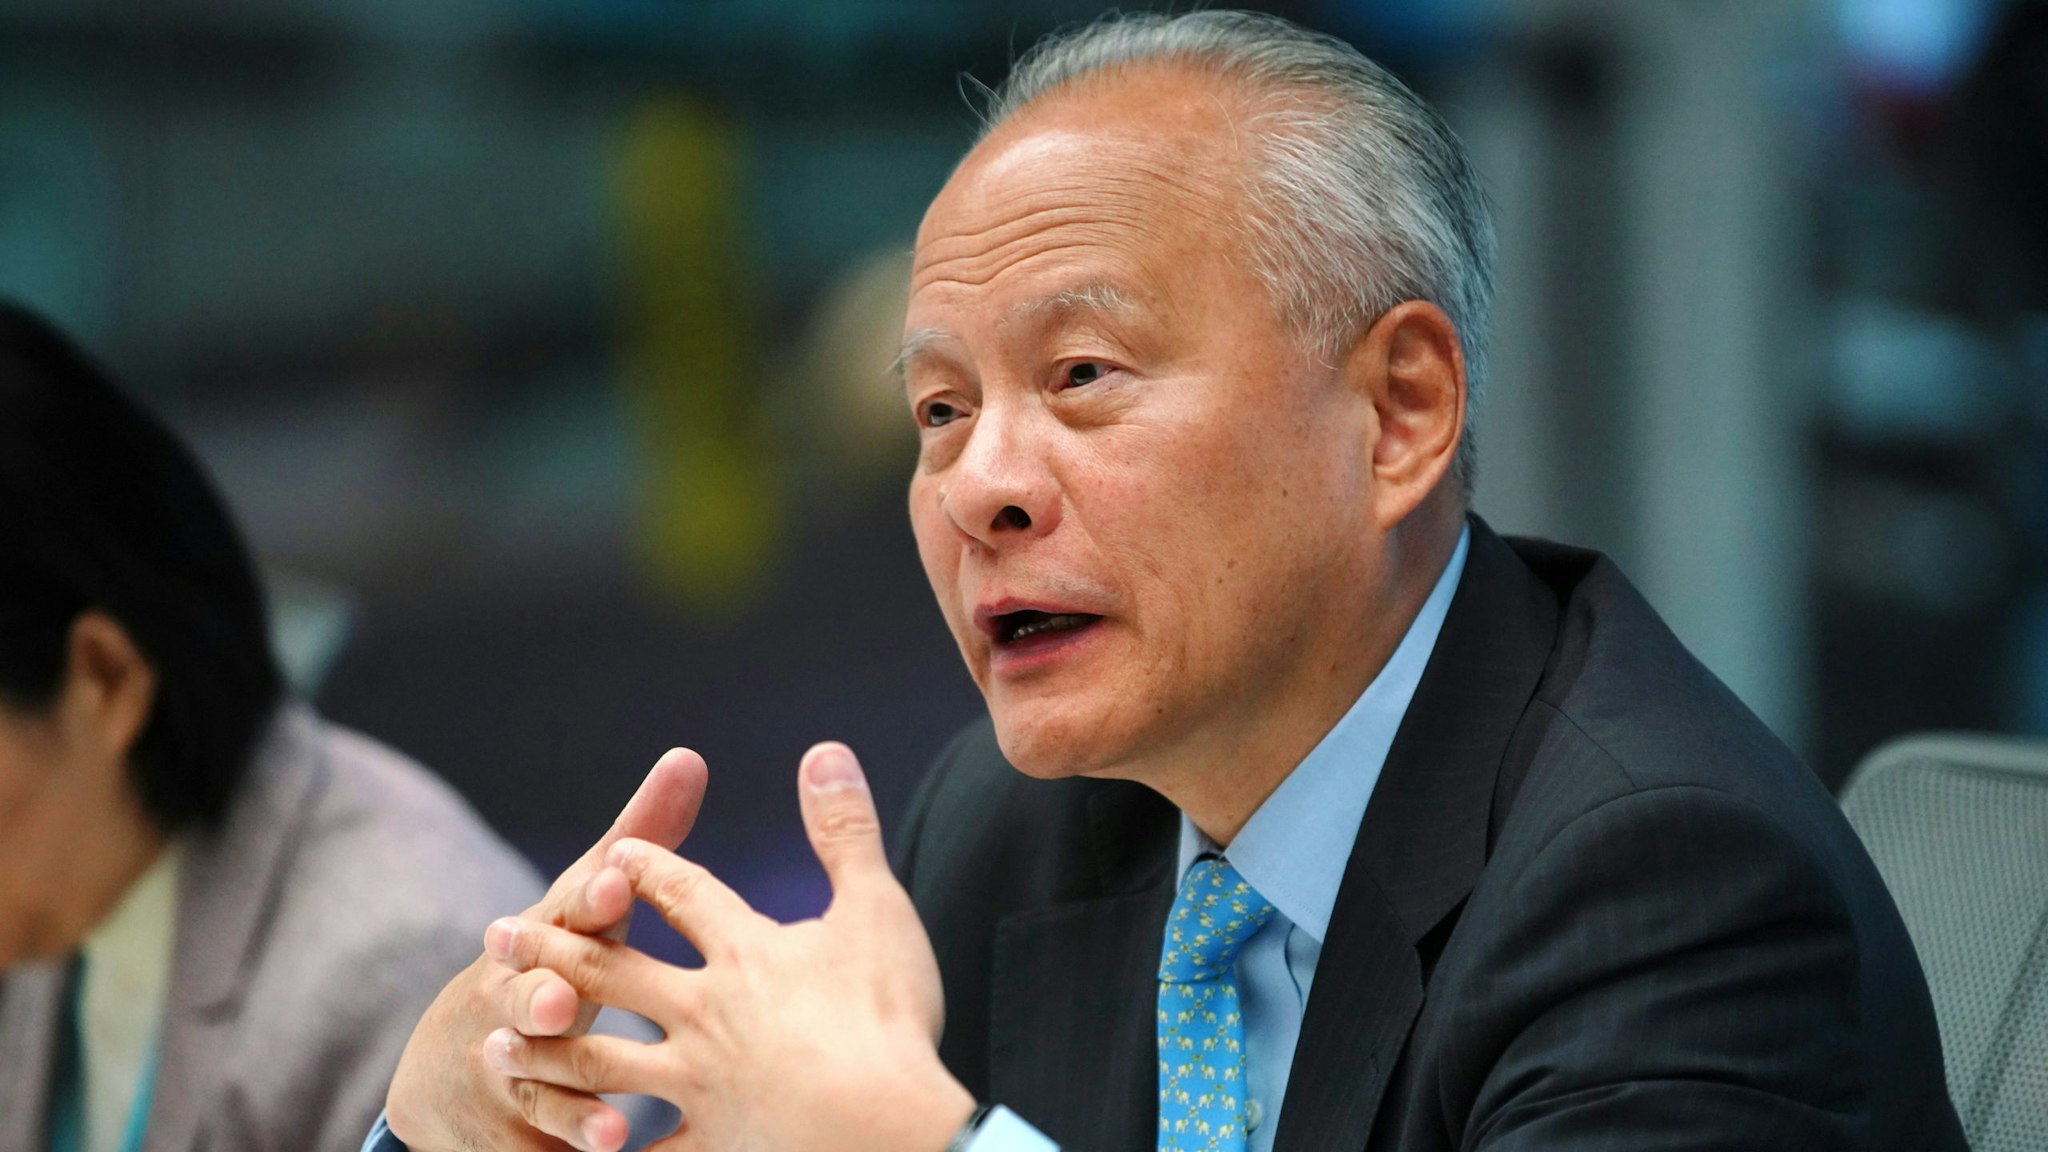 Cui Tiankai, China's ambassador to the U.S., speaks during an interview in New York, U.S., on Friday, May 24, 2019. Tiankai discussed U.S. President Donald Trump's blacklisting of Huawei Technologies Inc. and the breakdown of U.S.-China trade talks.